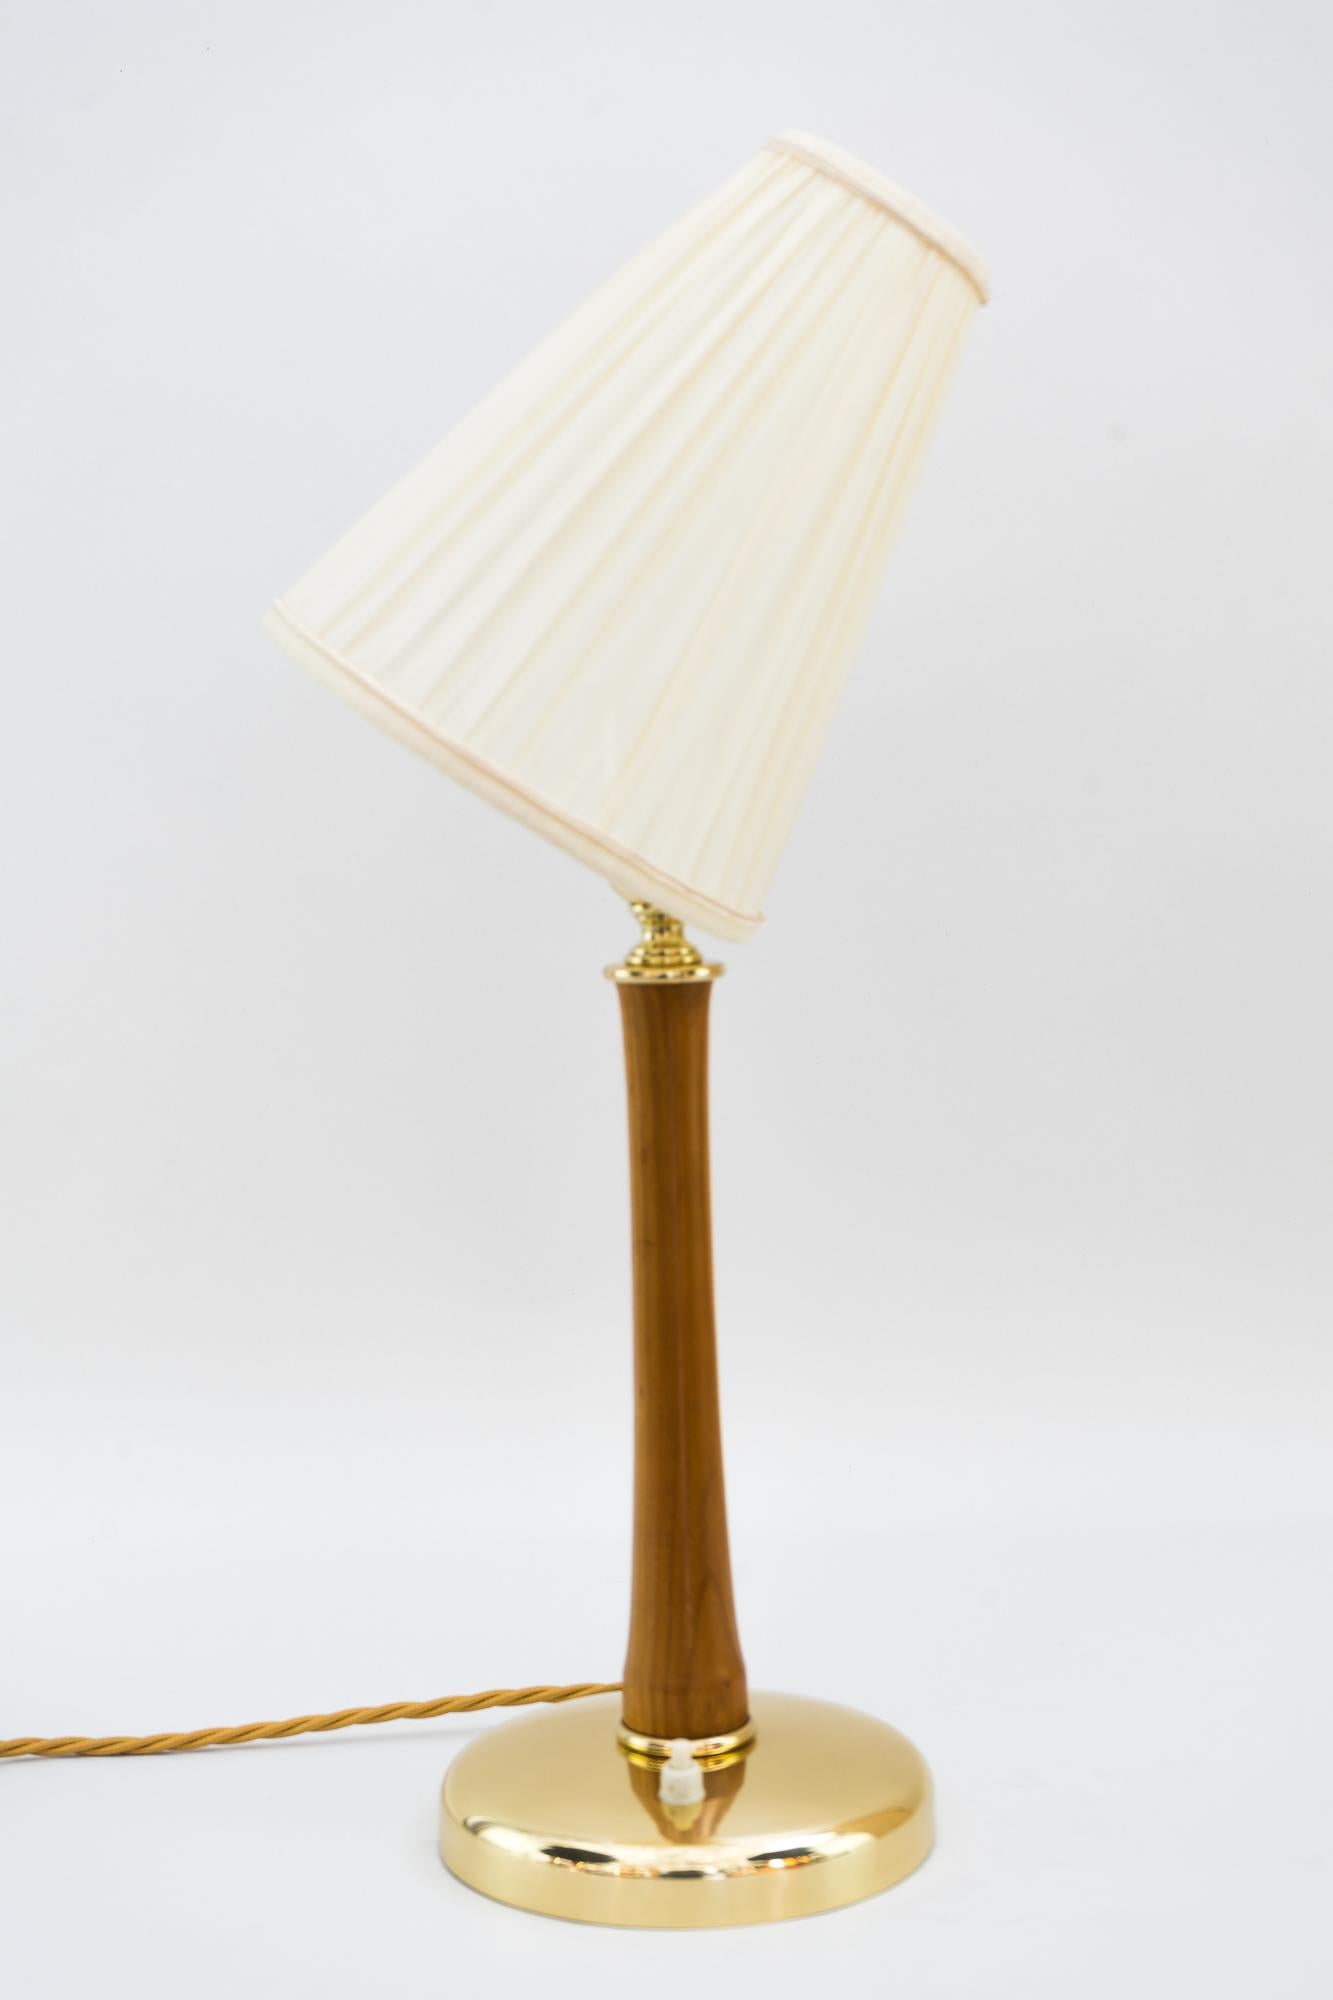 Rupert Nikoll table lamp, Vienna, circa 1950s
Brass parts polished and stove enameled
Nutwood polished
The shade is replaced (New).